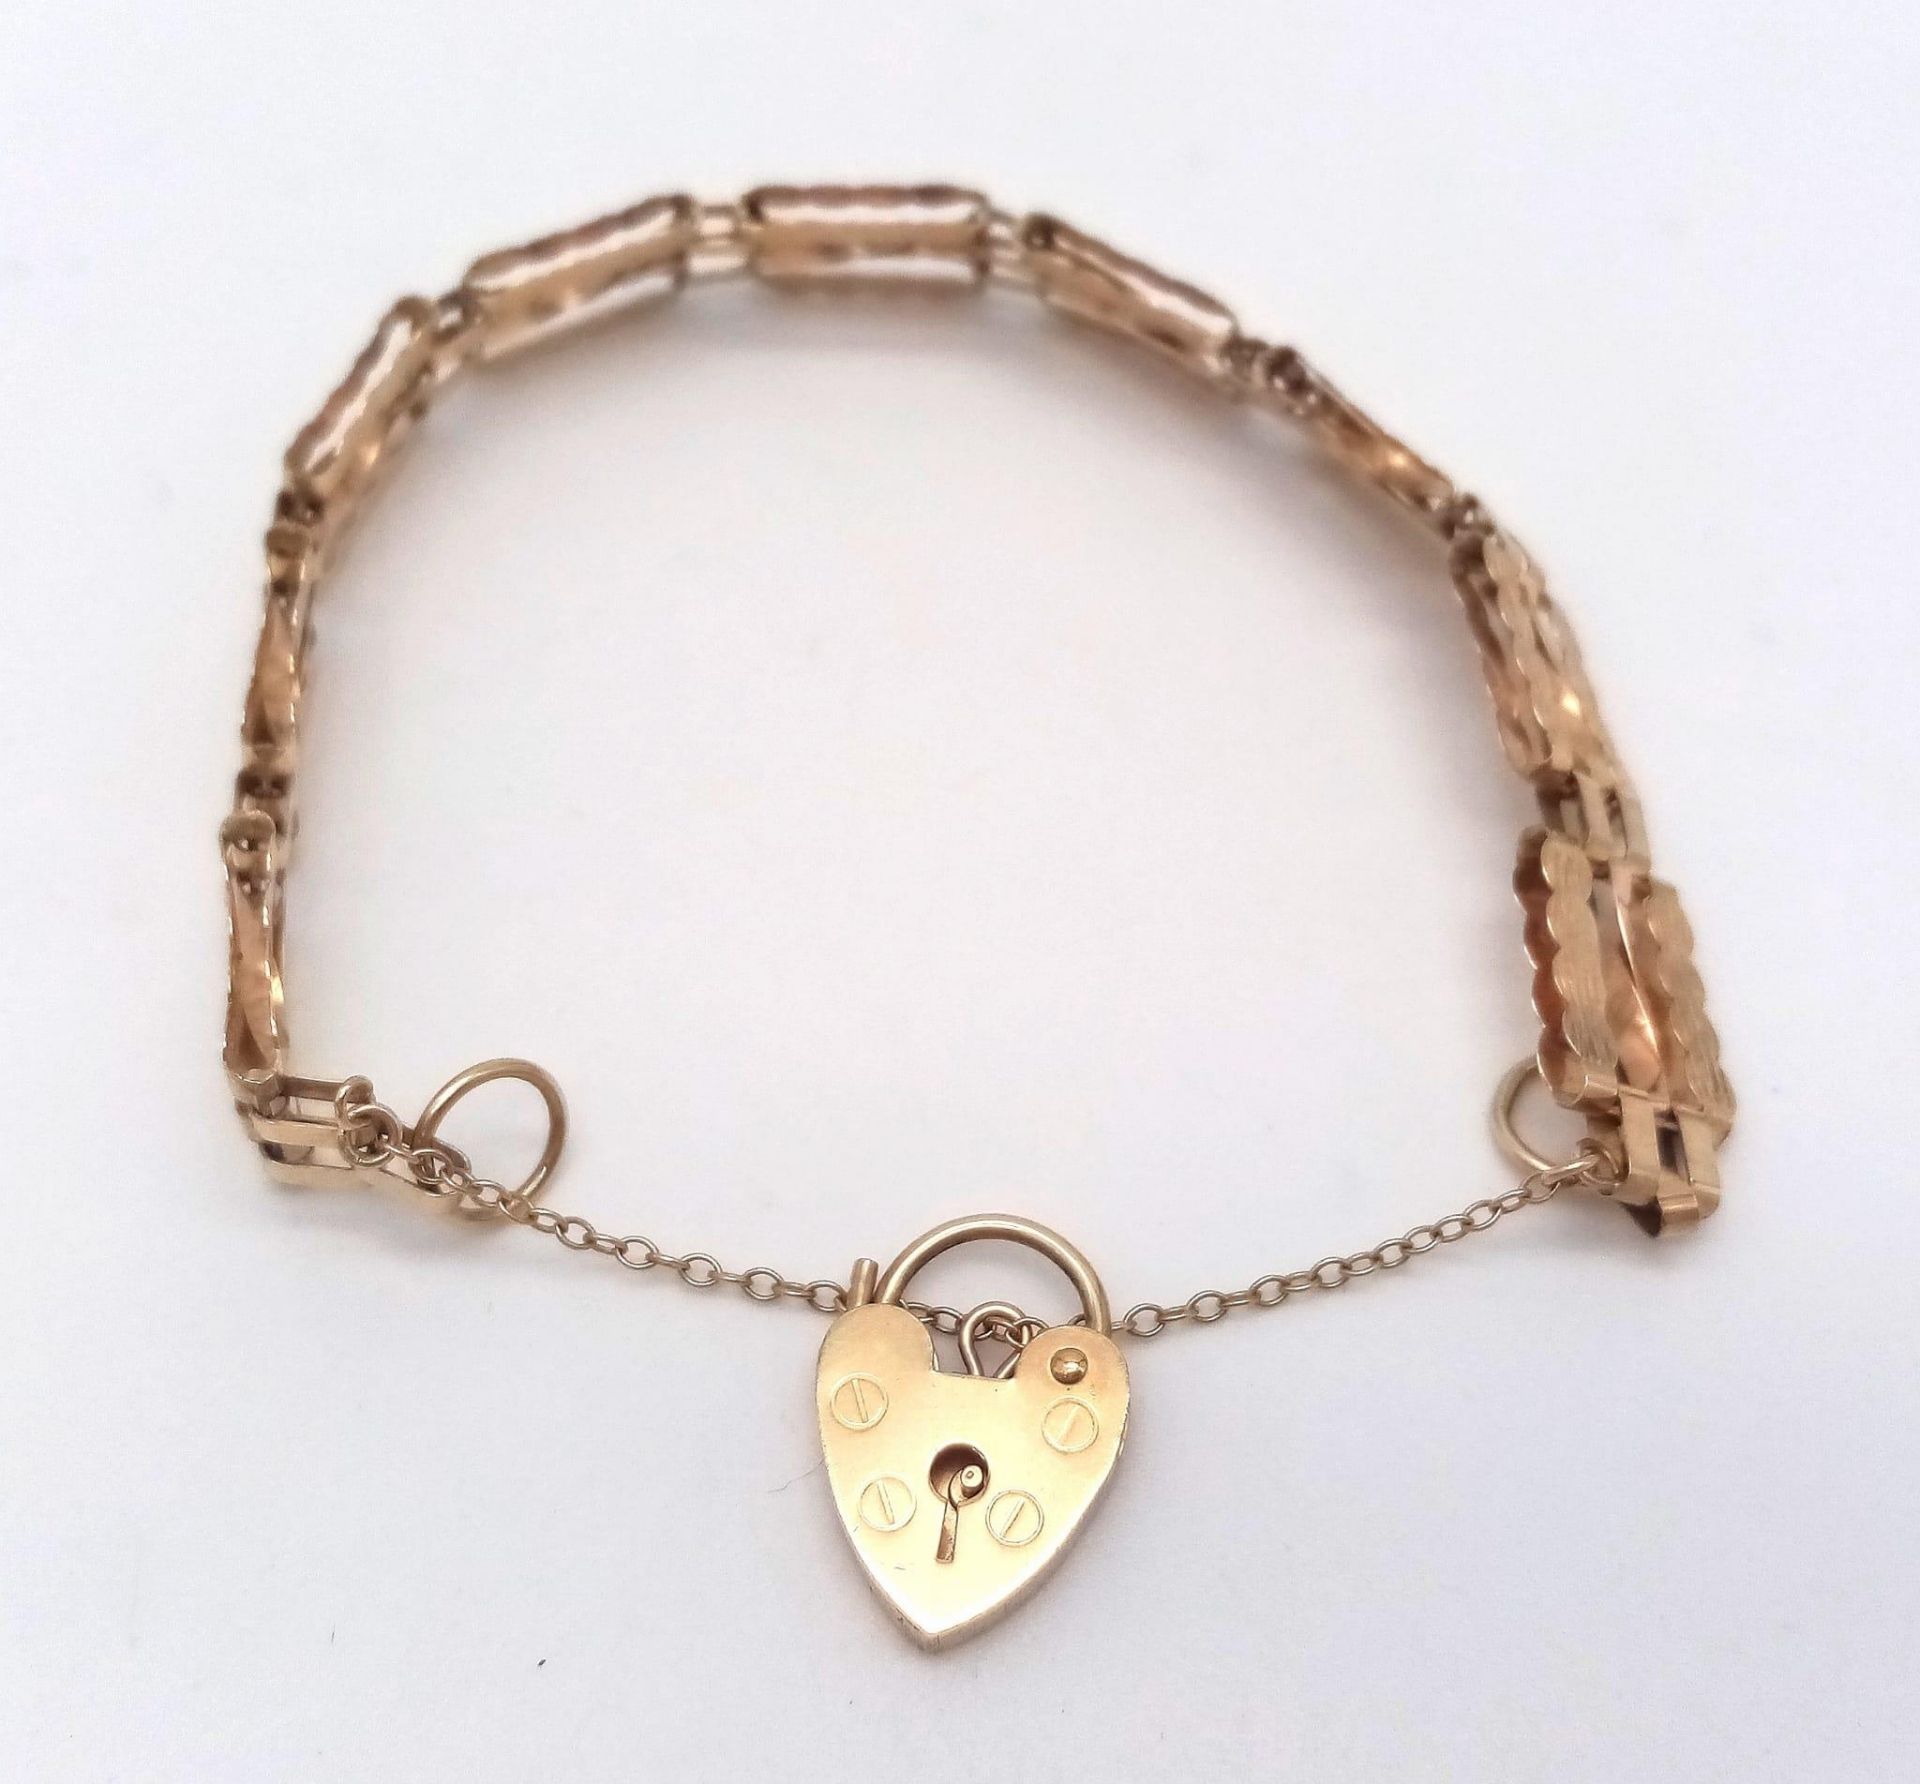 AN ANTIQUE 9K GOLD NICELY PATTERNED GATE BRACELET WITH HEART PADLOCK AND SAFETY CHAIN . 8.1gms - Bild 4 aus 9